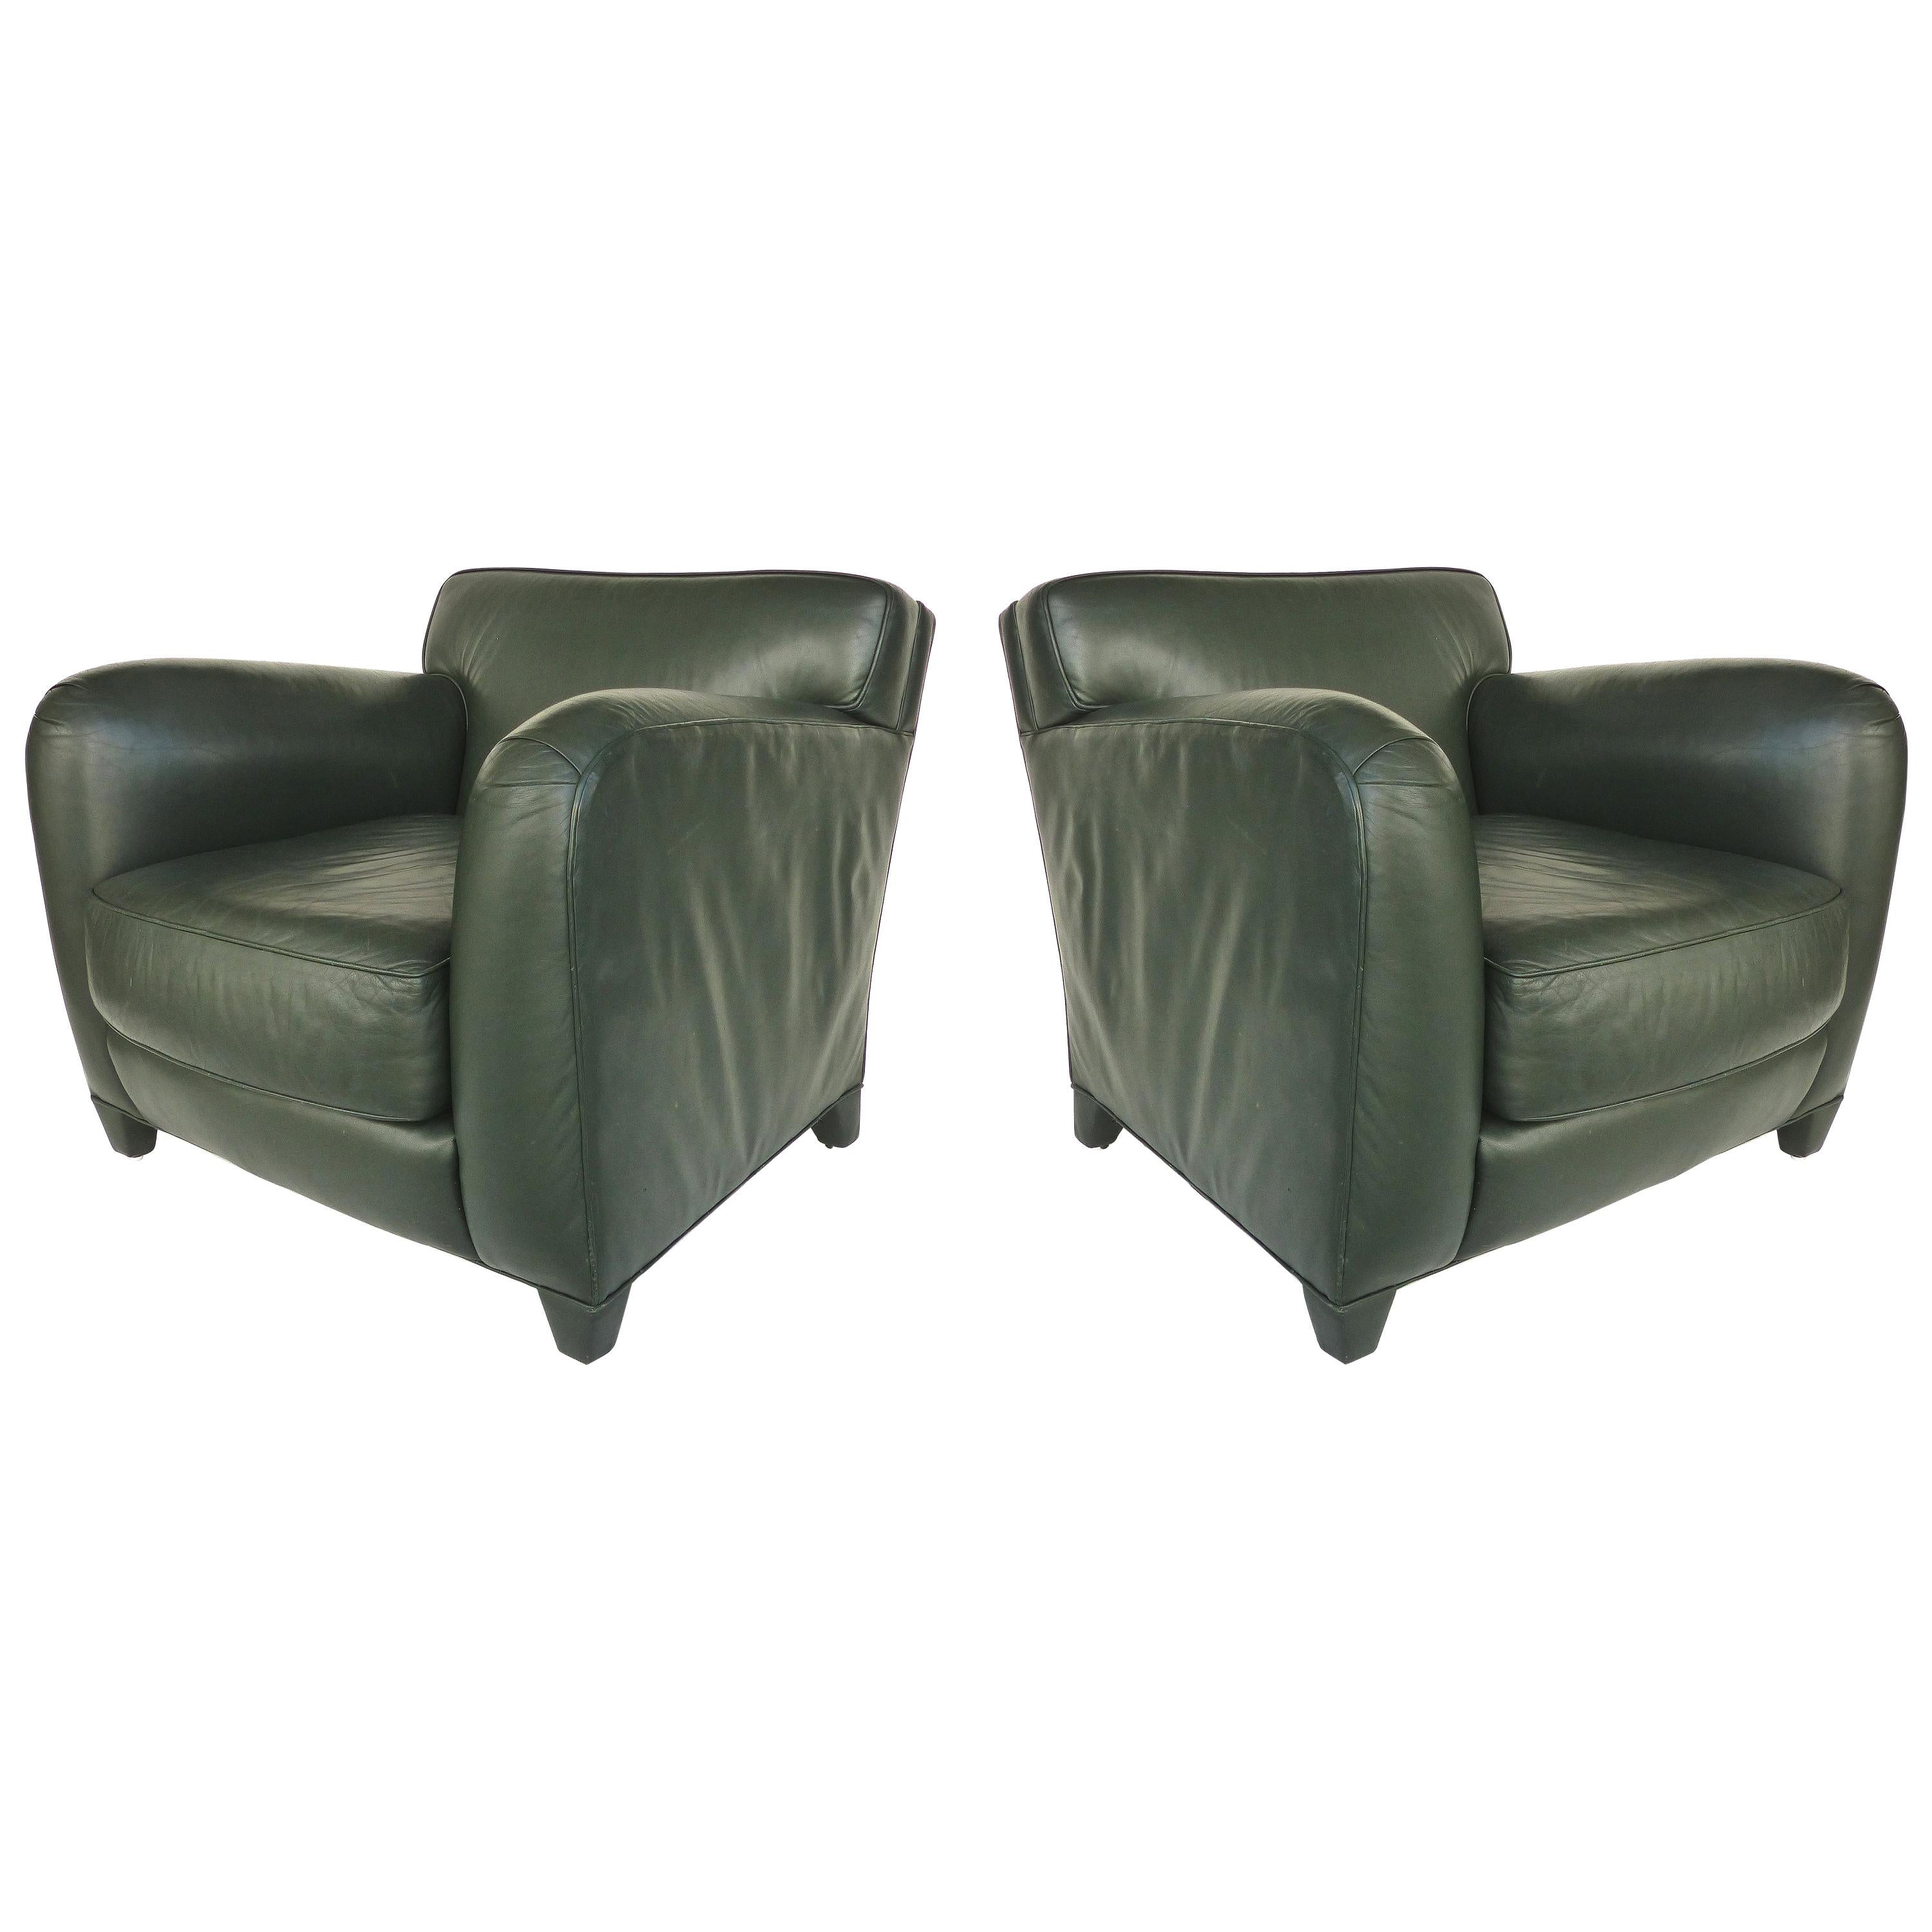 Donghia Leather Club Chairs from the Main Street Collection in Forest Green 